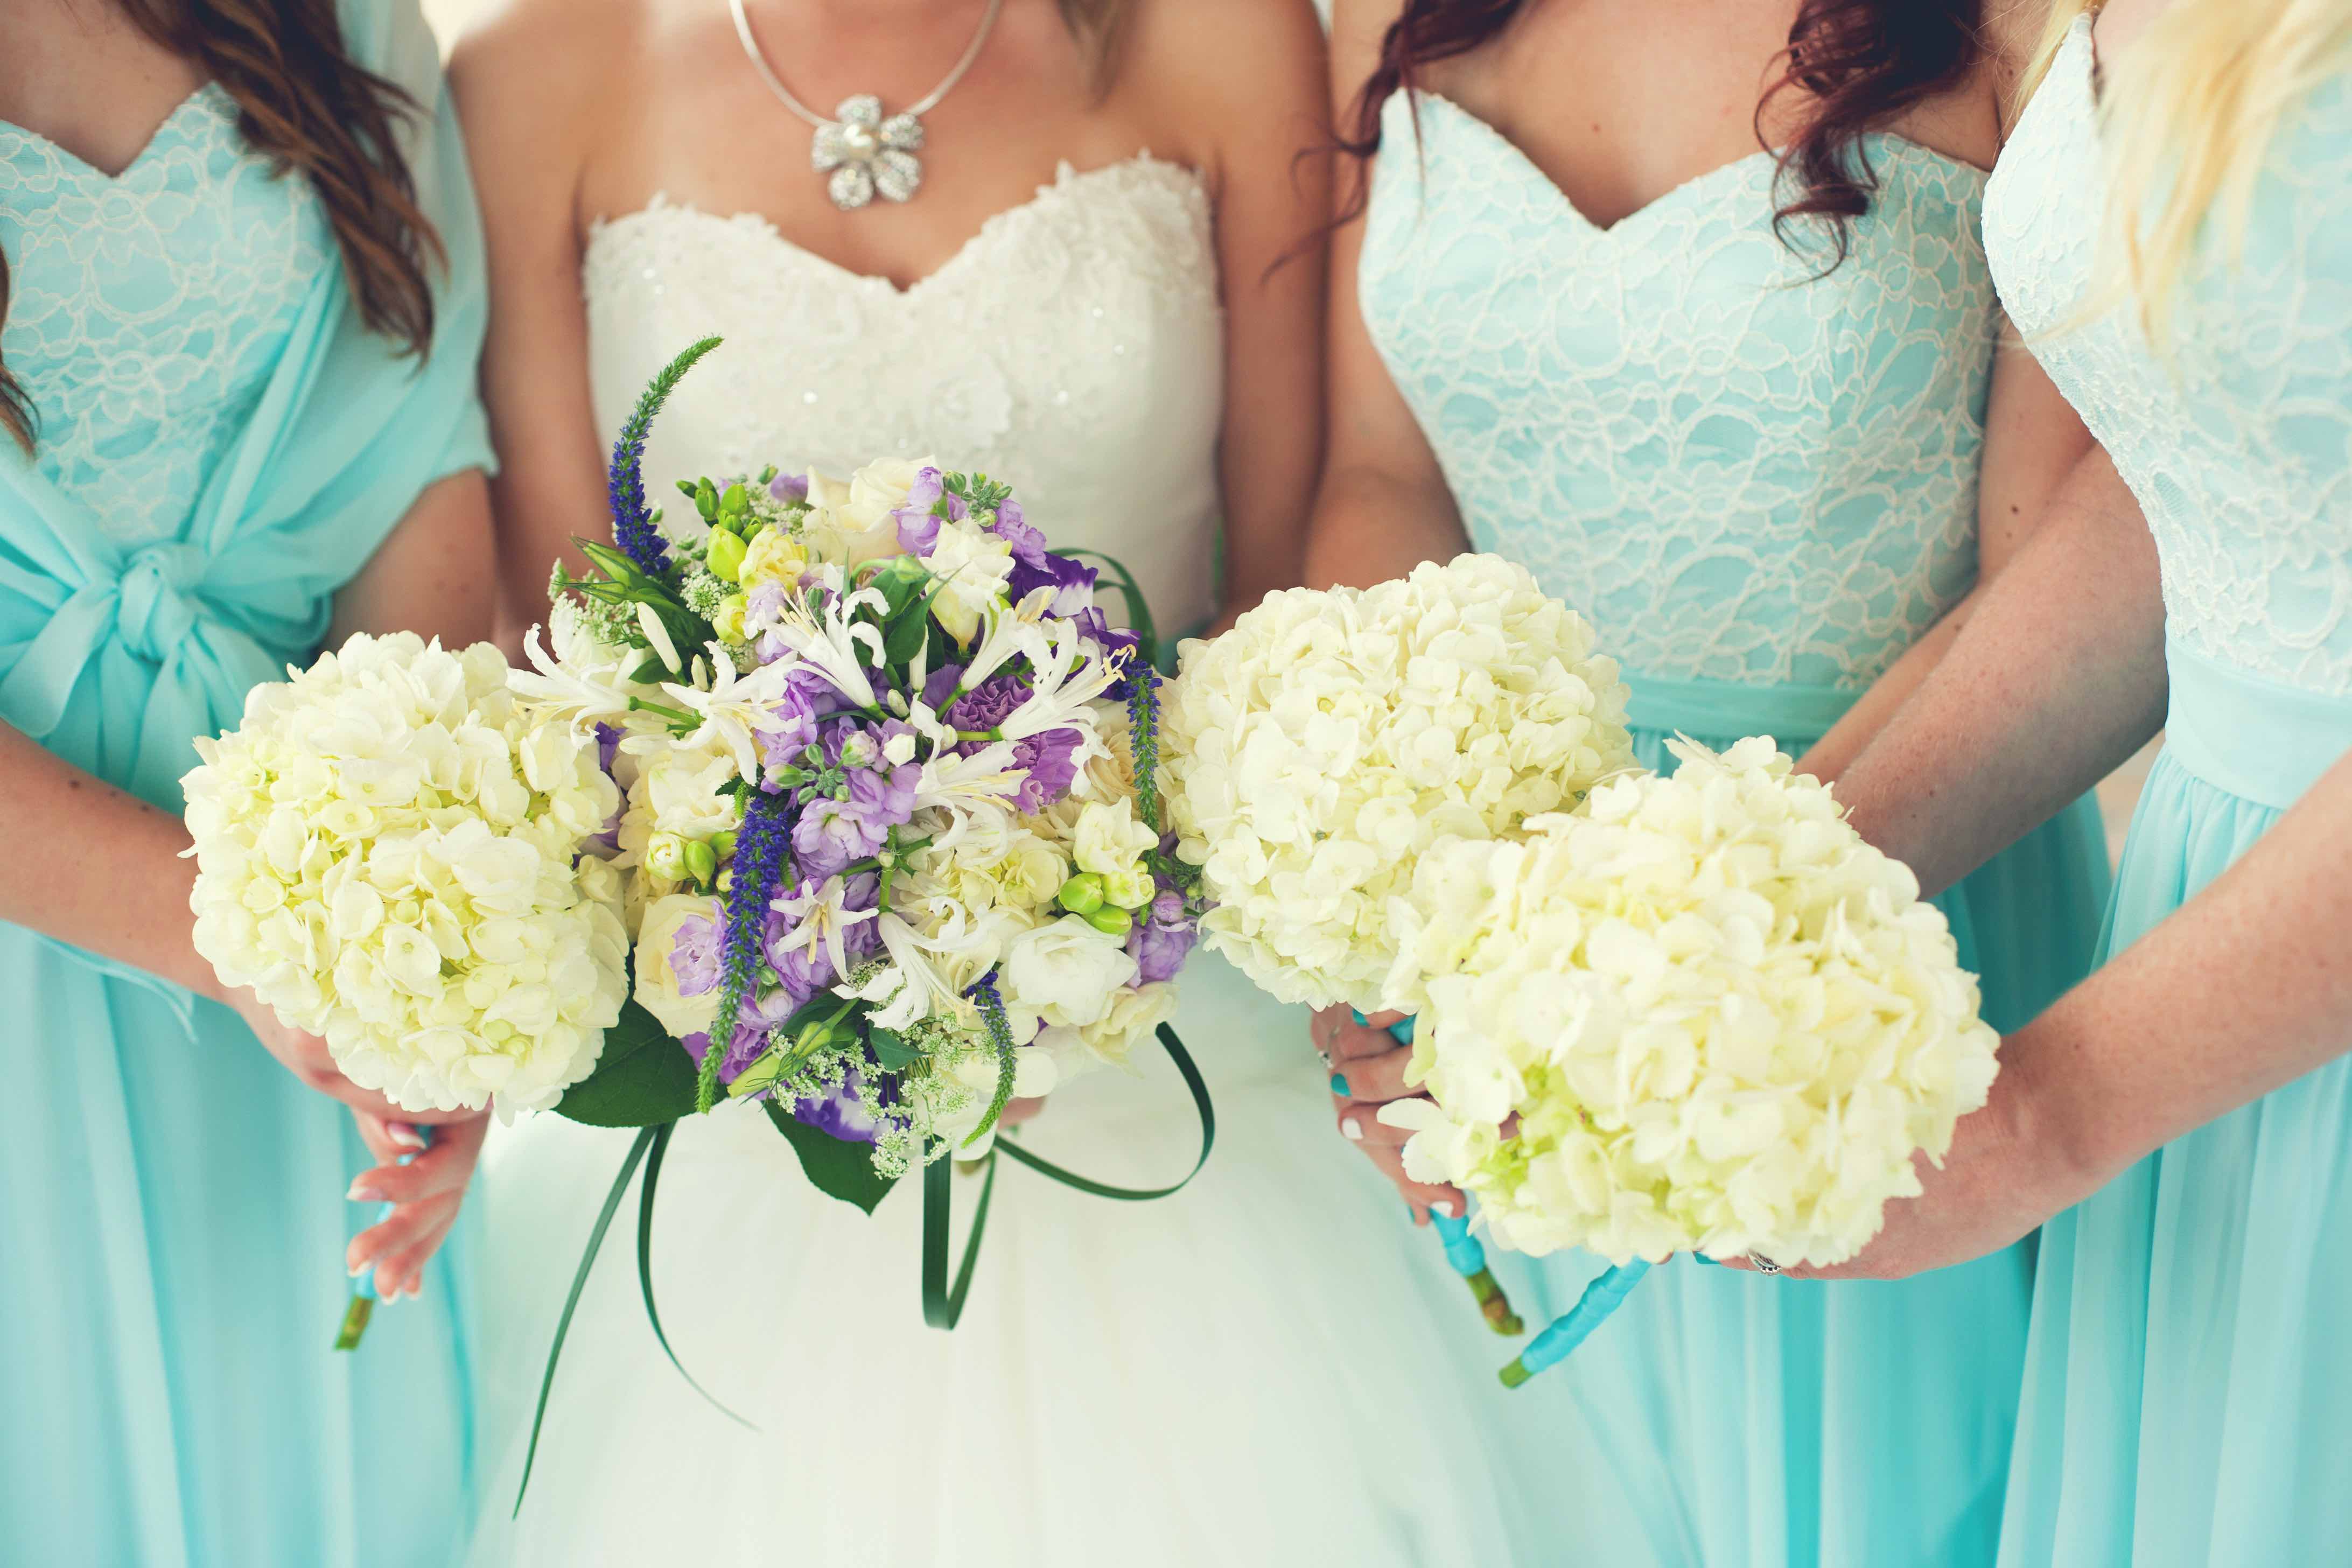 Gifts your bridesmaids will love